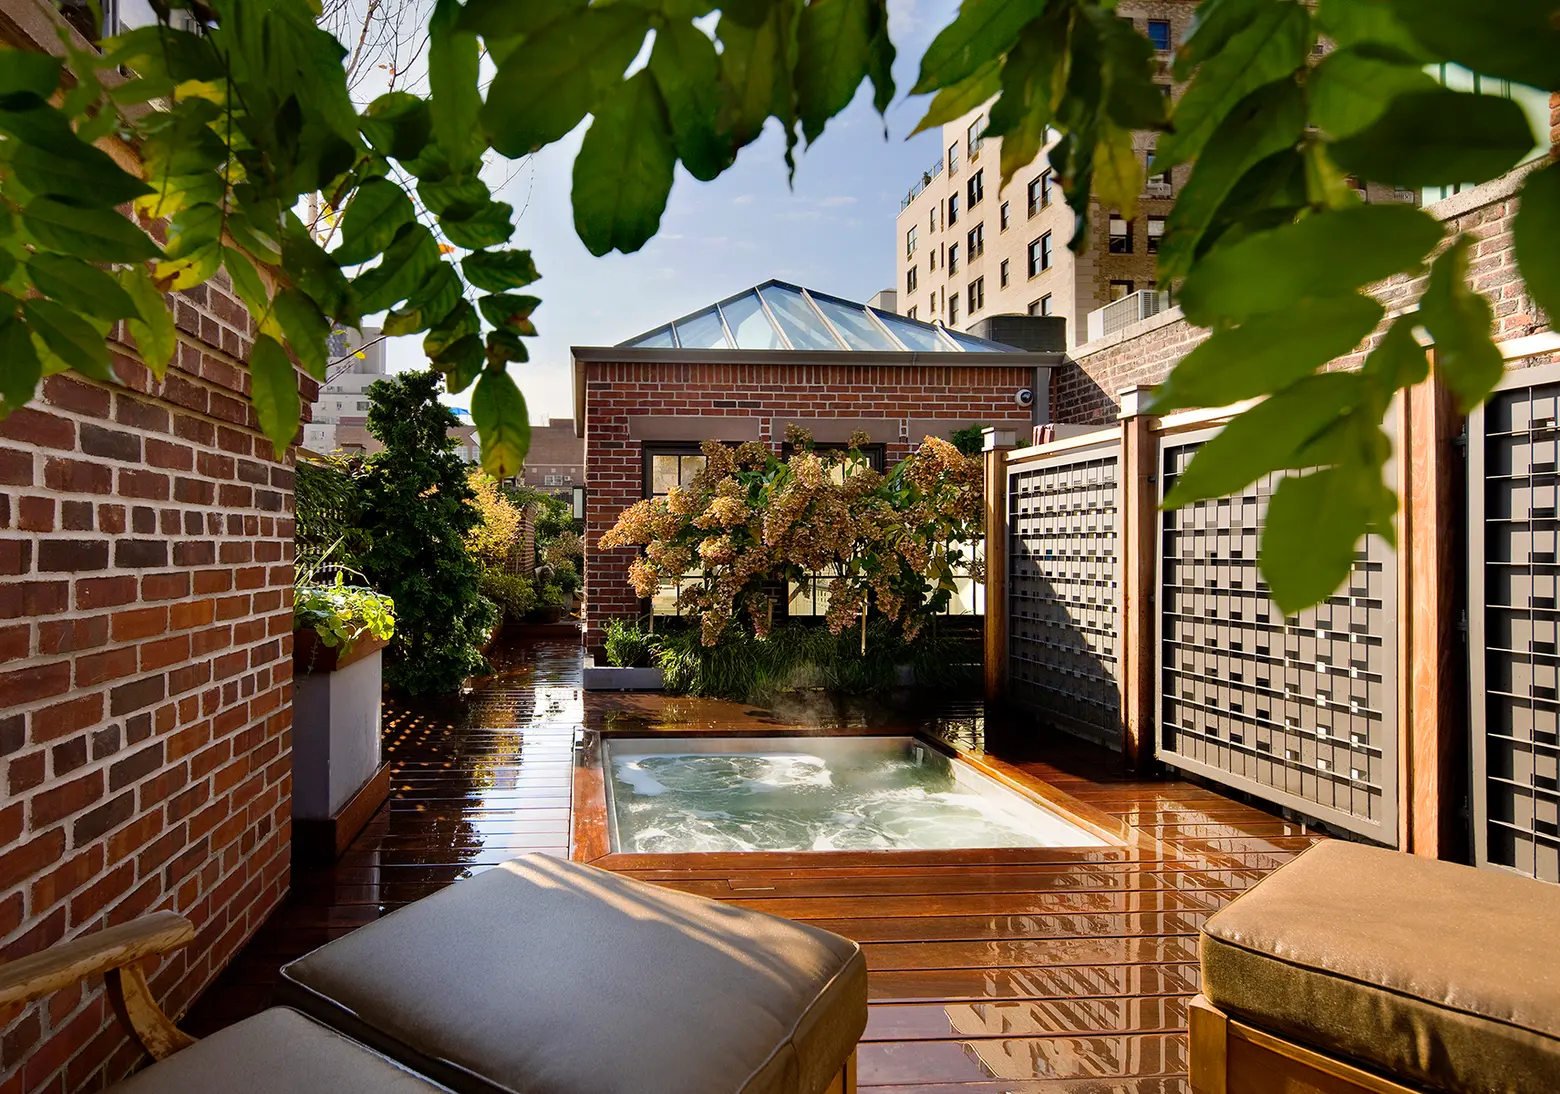 $16.5M Upper East Side townhouse has a magical roof garden with a mini pool